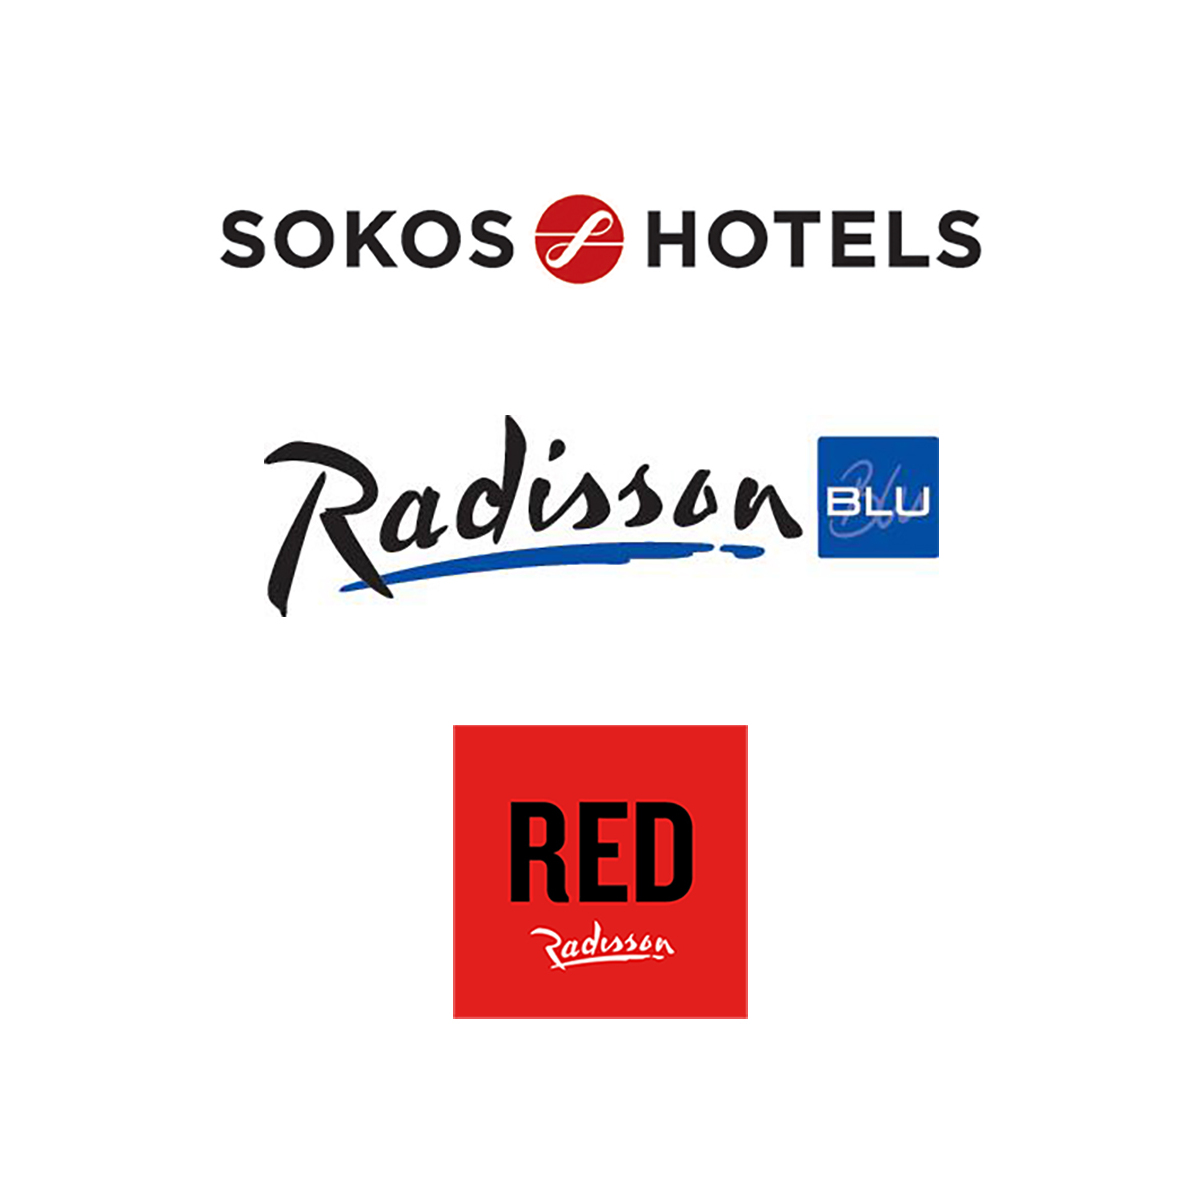 Sokos Hotels and Radisson Hotels in Finland and Lapland